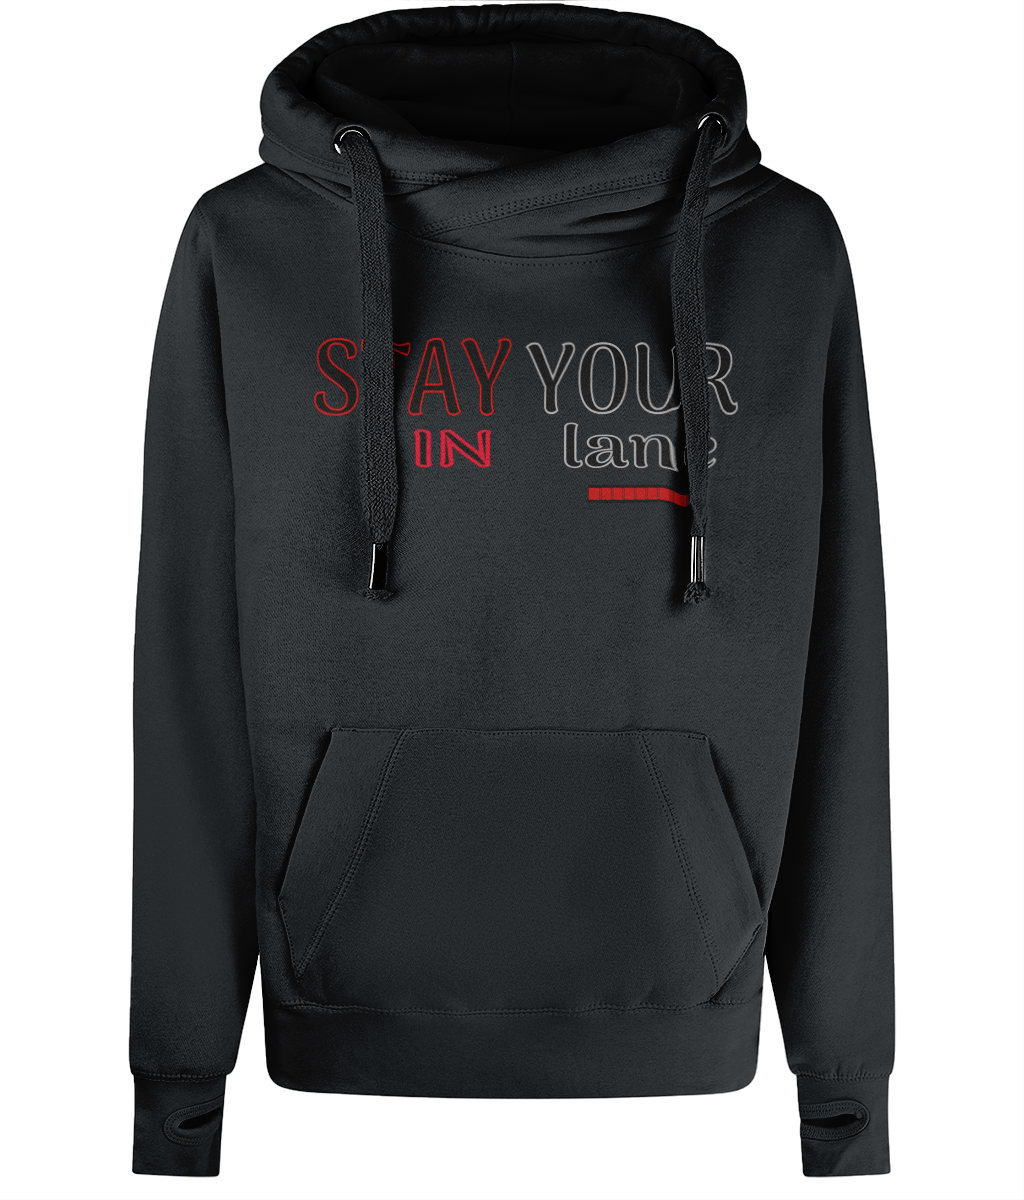 STAY IN YOUR lane 01-02 Designer Unisex AWDis Cross Neck Pullover Hoodie (3 colors)